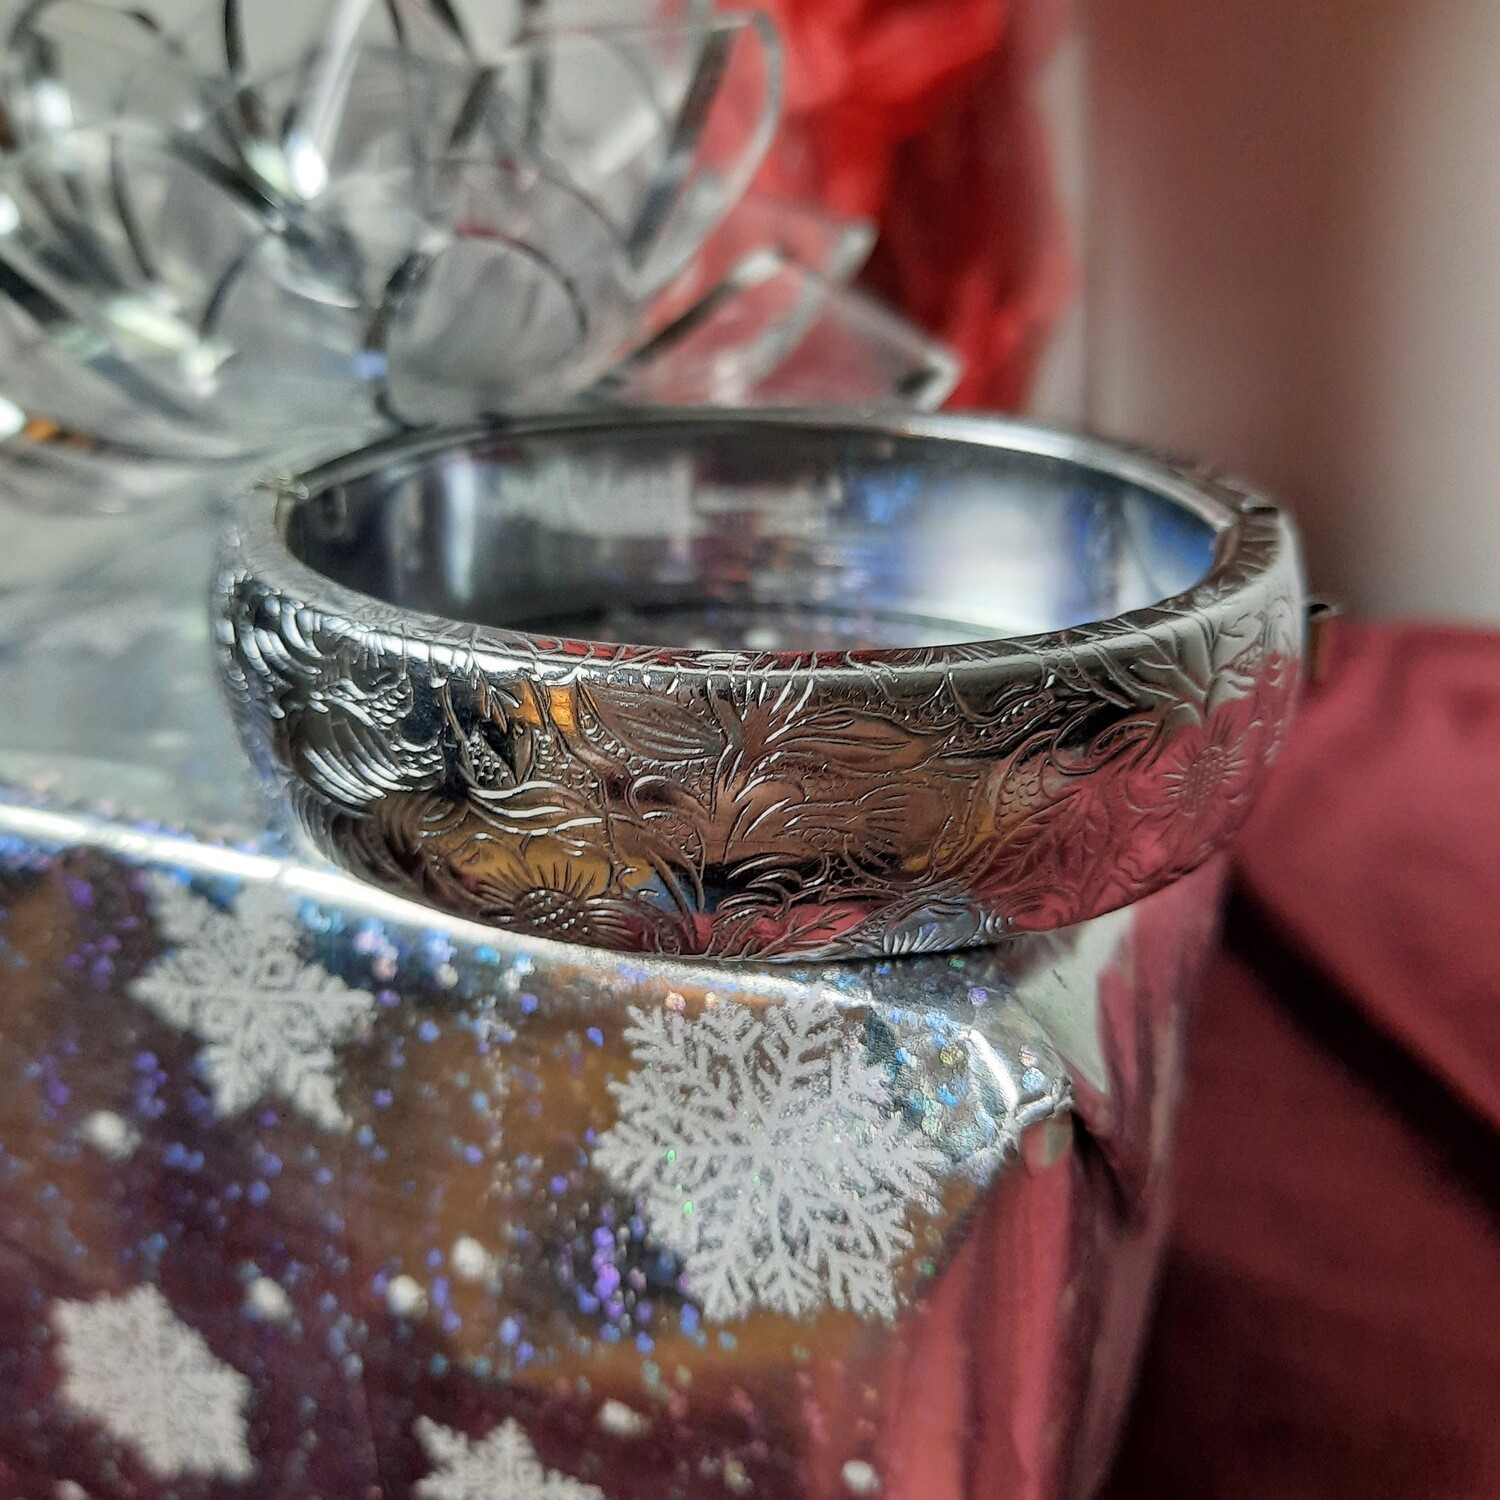 Silver Tone Hinged Bangle With Safety Chain and Intricate Floral Etched Design c. 1970's